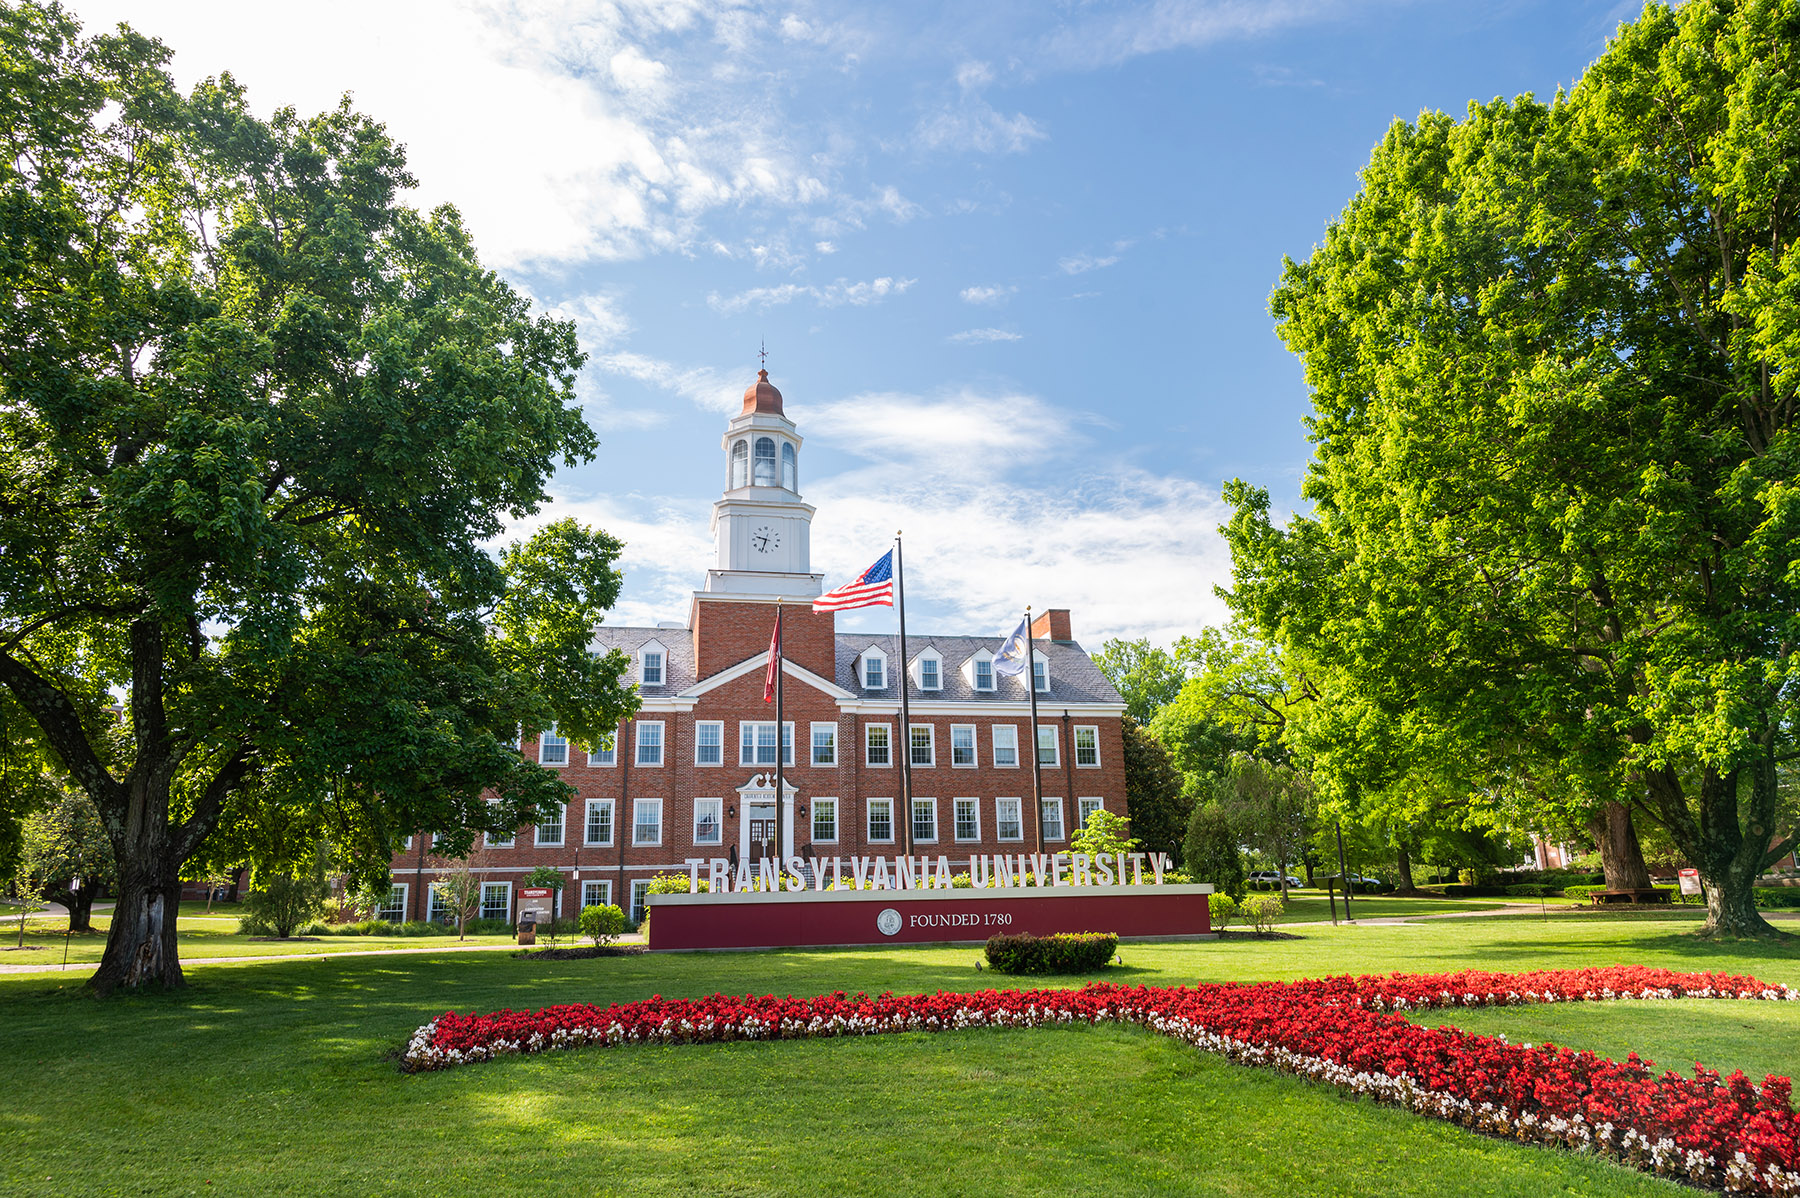 Update on campus reopening plans for Transylvania (June 2, 2020)